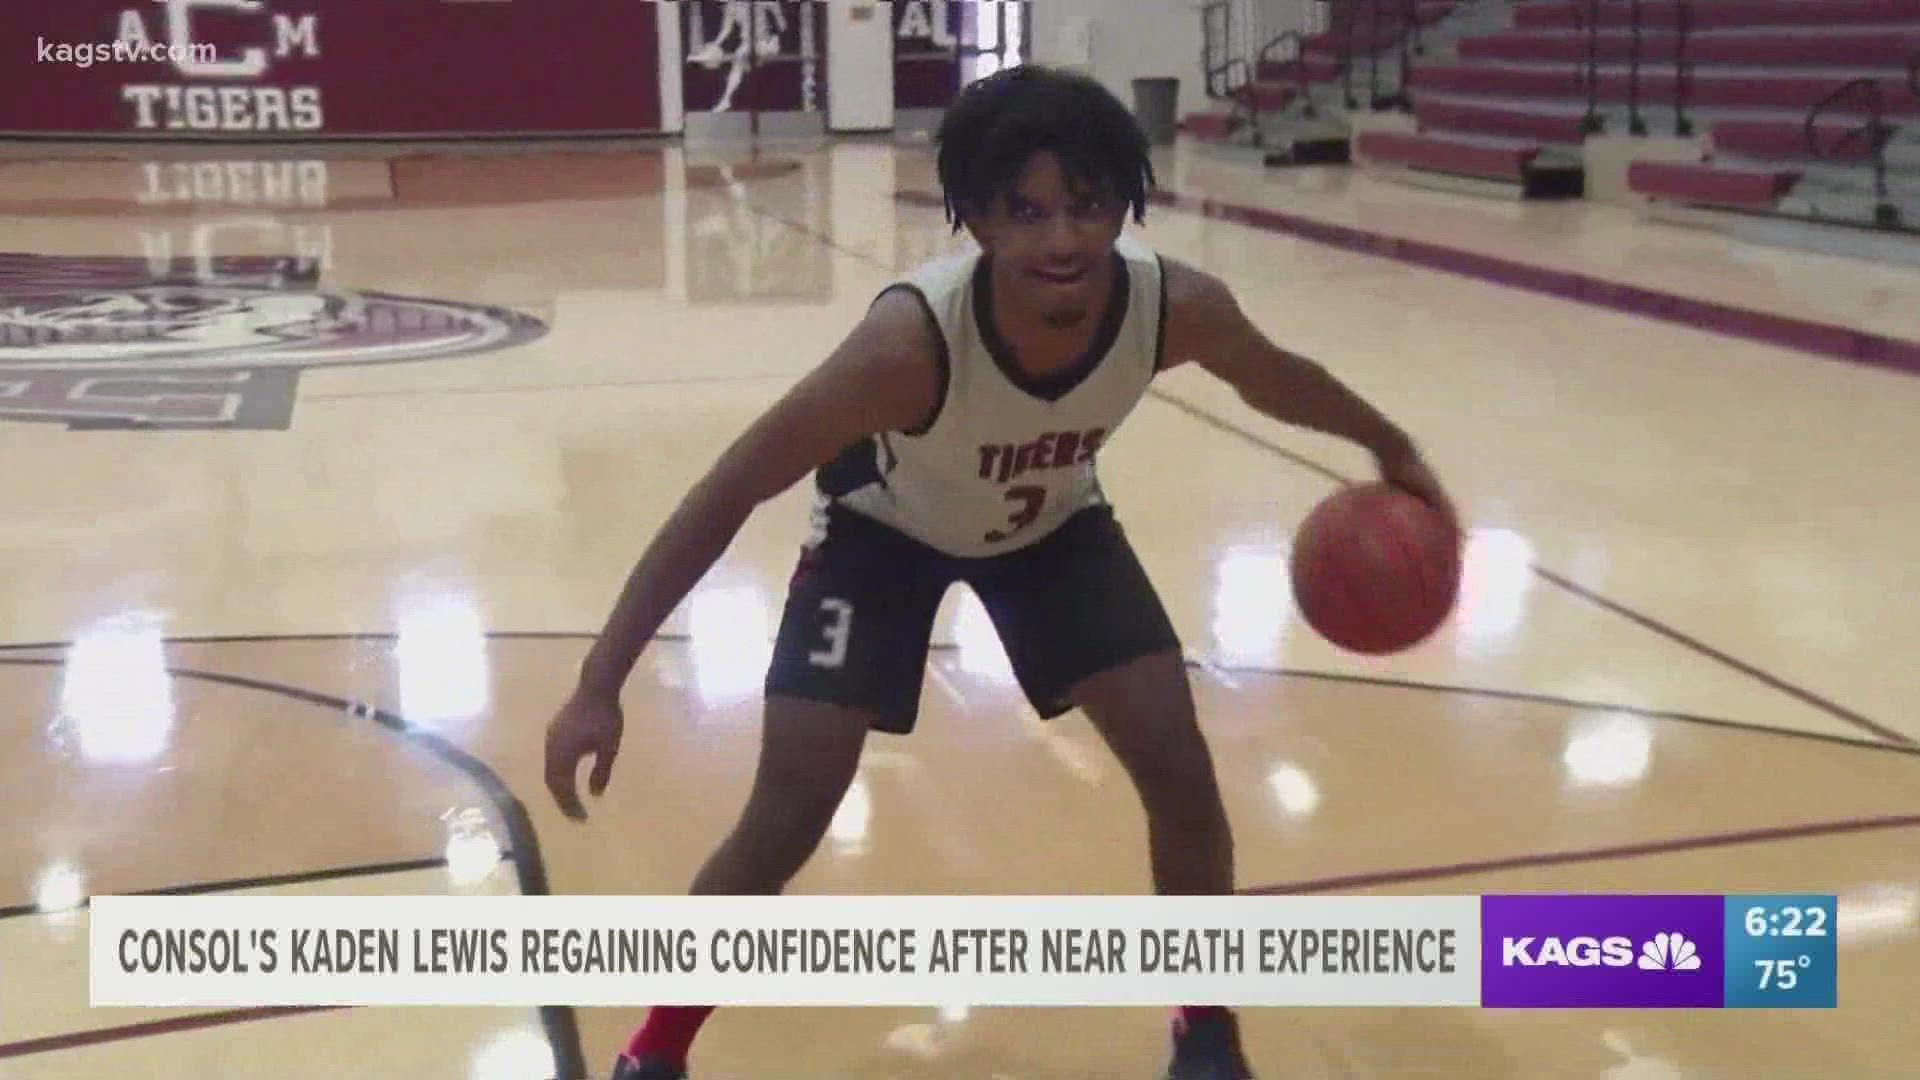 In July, Kaden Lewis was hit with a stray bullet that left him in critical condition. Three months later, he was back on the court for A&M Consolidated.